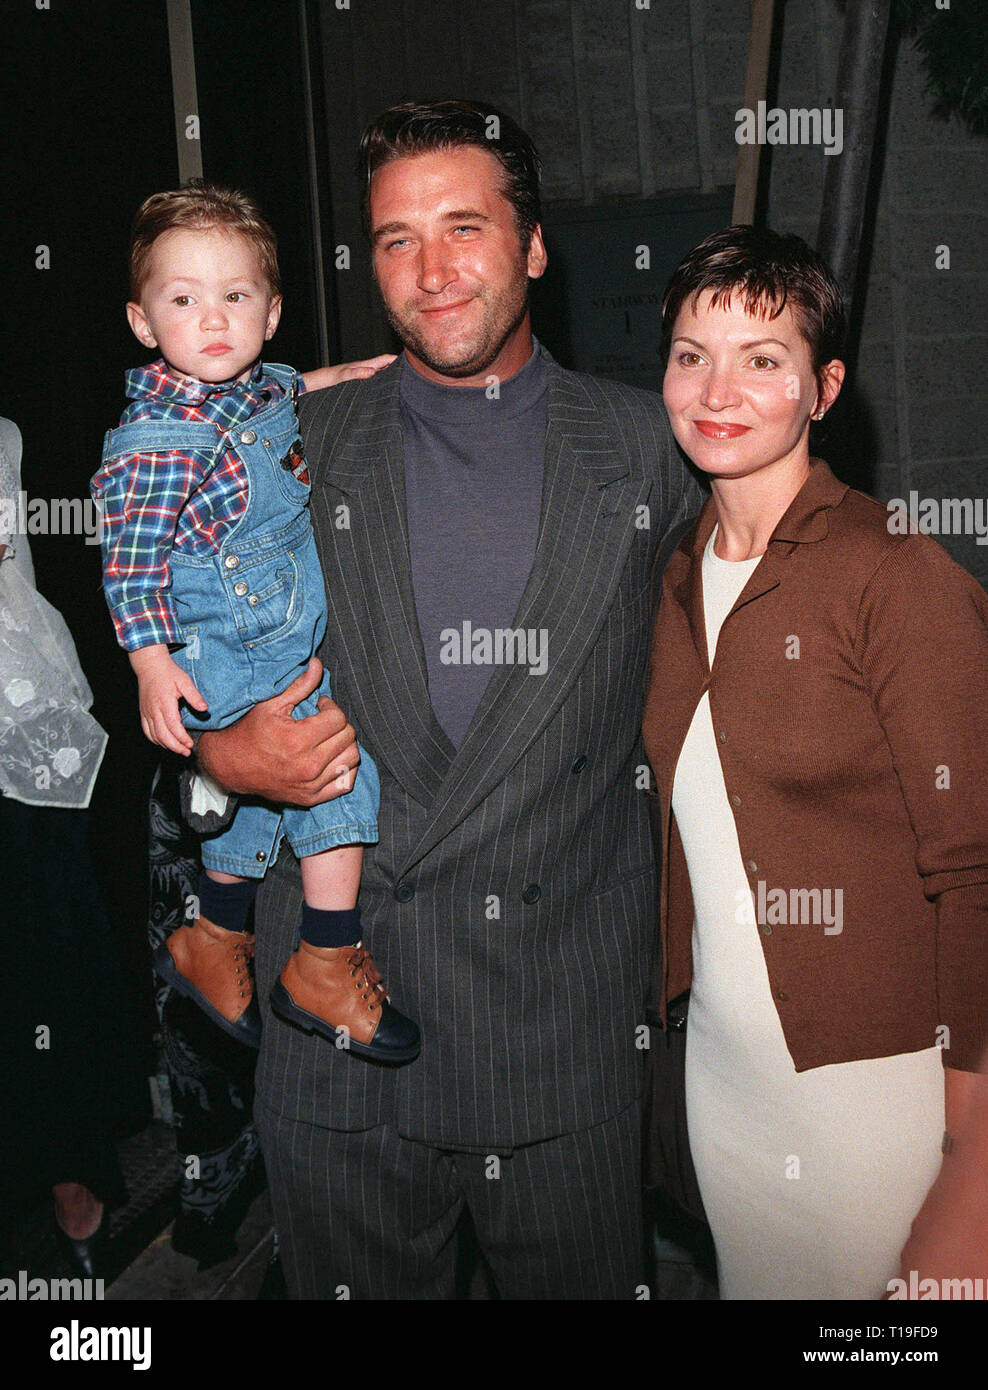 LOS ANGELES, CA - August 12, 1998:  Actor DANIEL BALDWIN & wife & son at screening of 'Friends and Lovers' which stars his brother Stephen Baldwin & Robert Downey Jr. Stock Photo